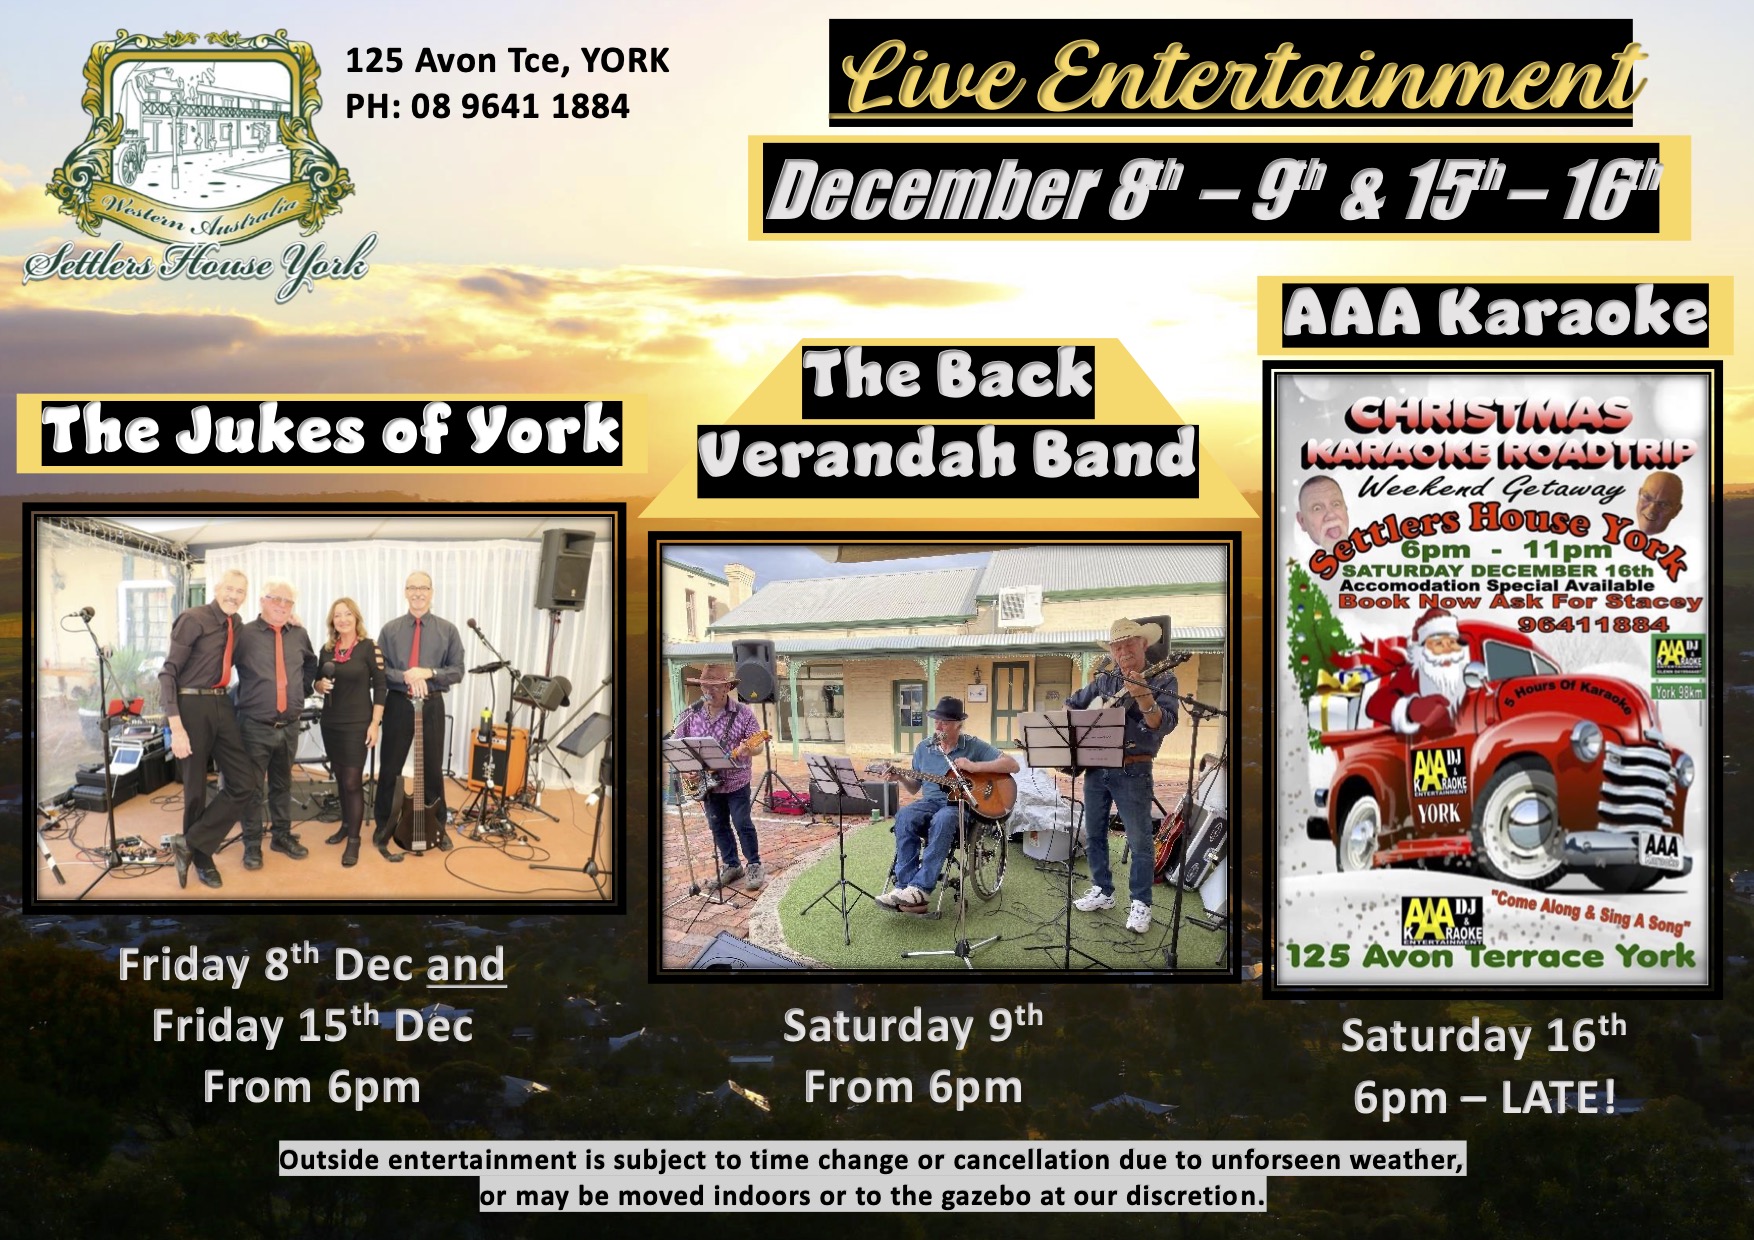 Live Entertainment at Settlers House - December 8th-9th & 15th-16th